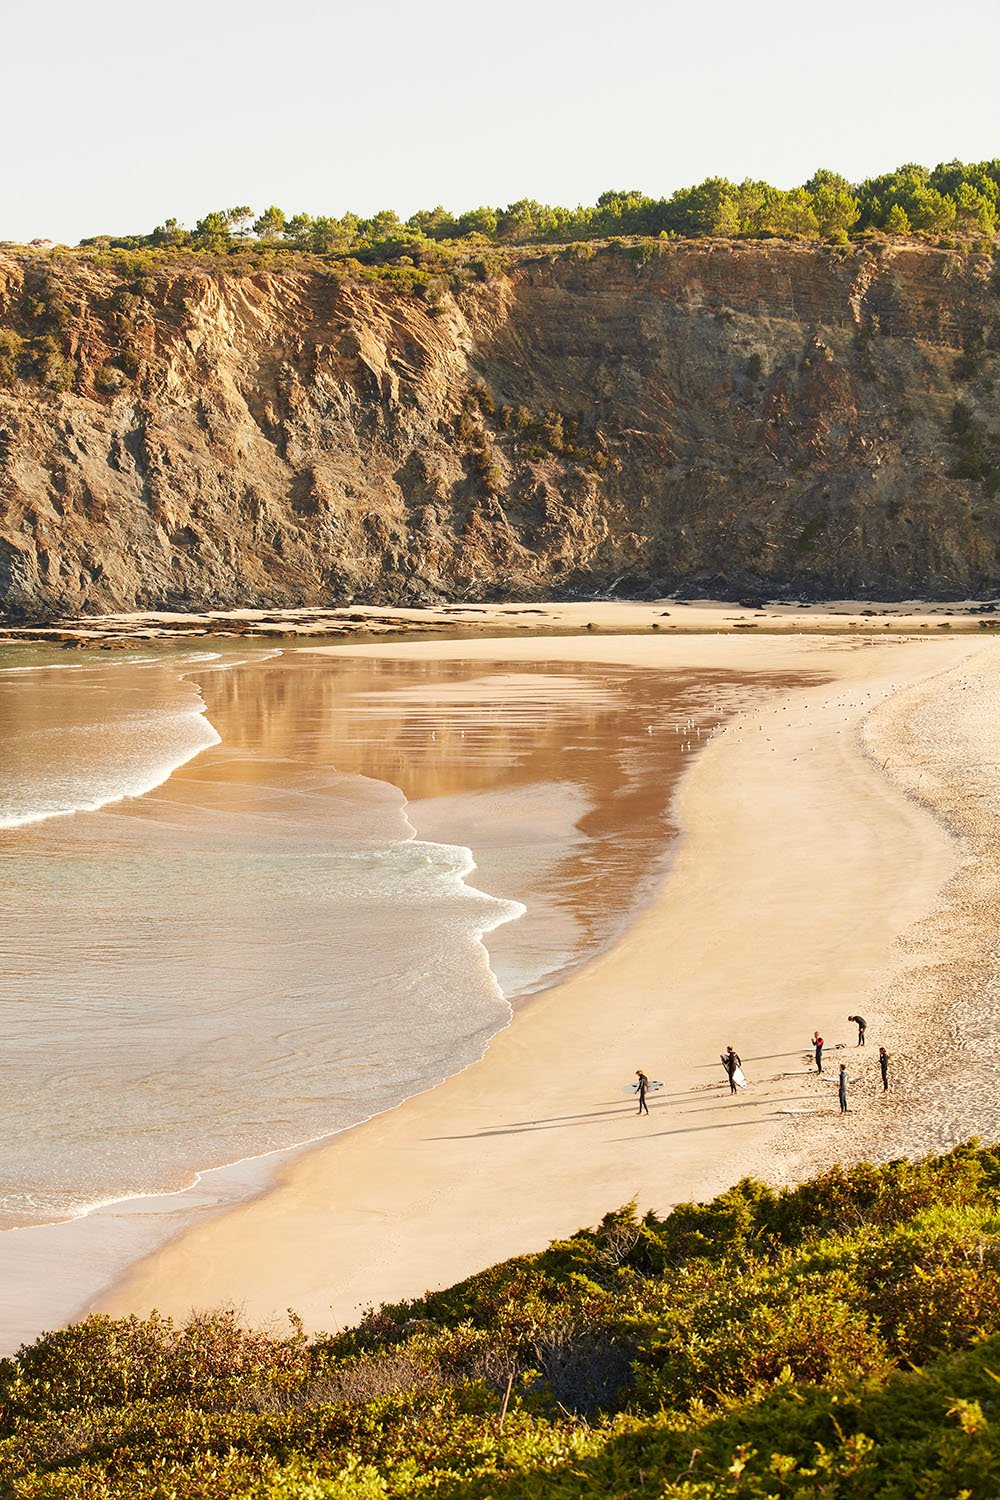 Richard James Taylor photographs the coast of the Algarve for National Geographic Traveller